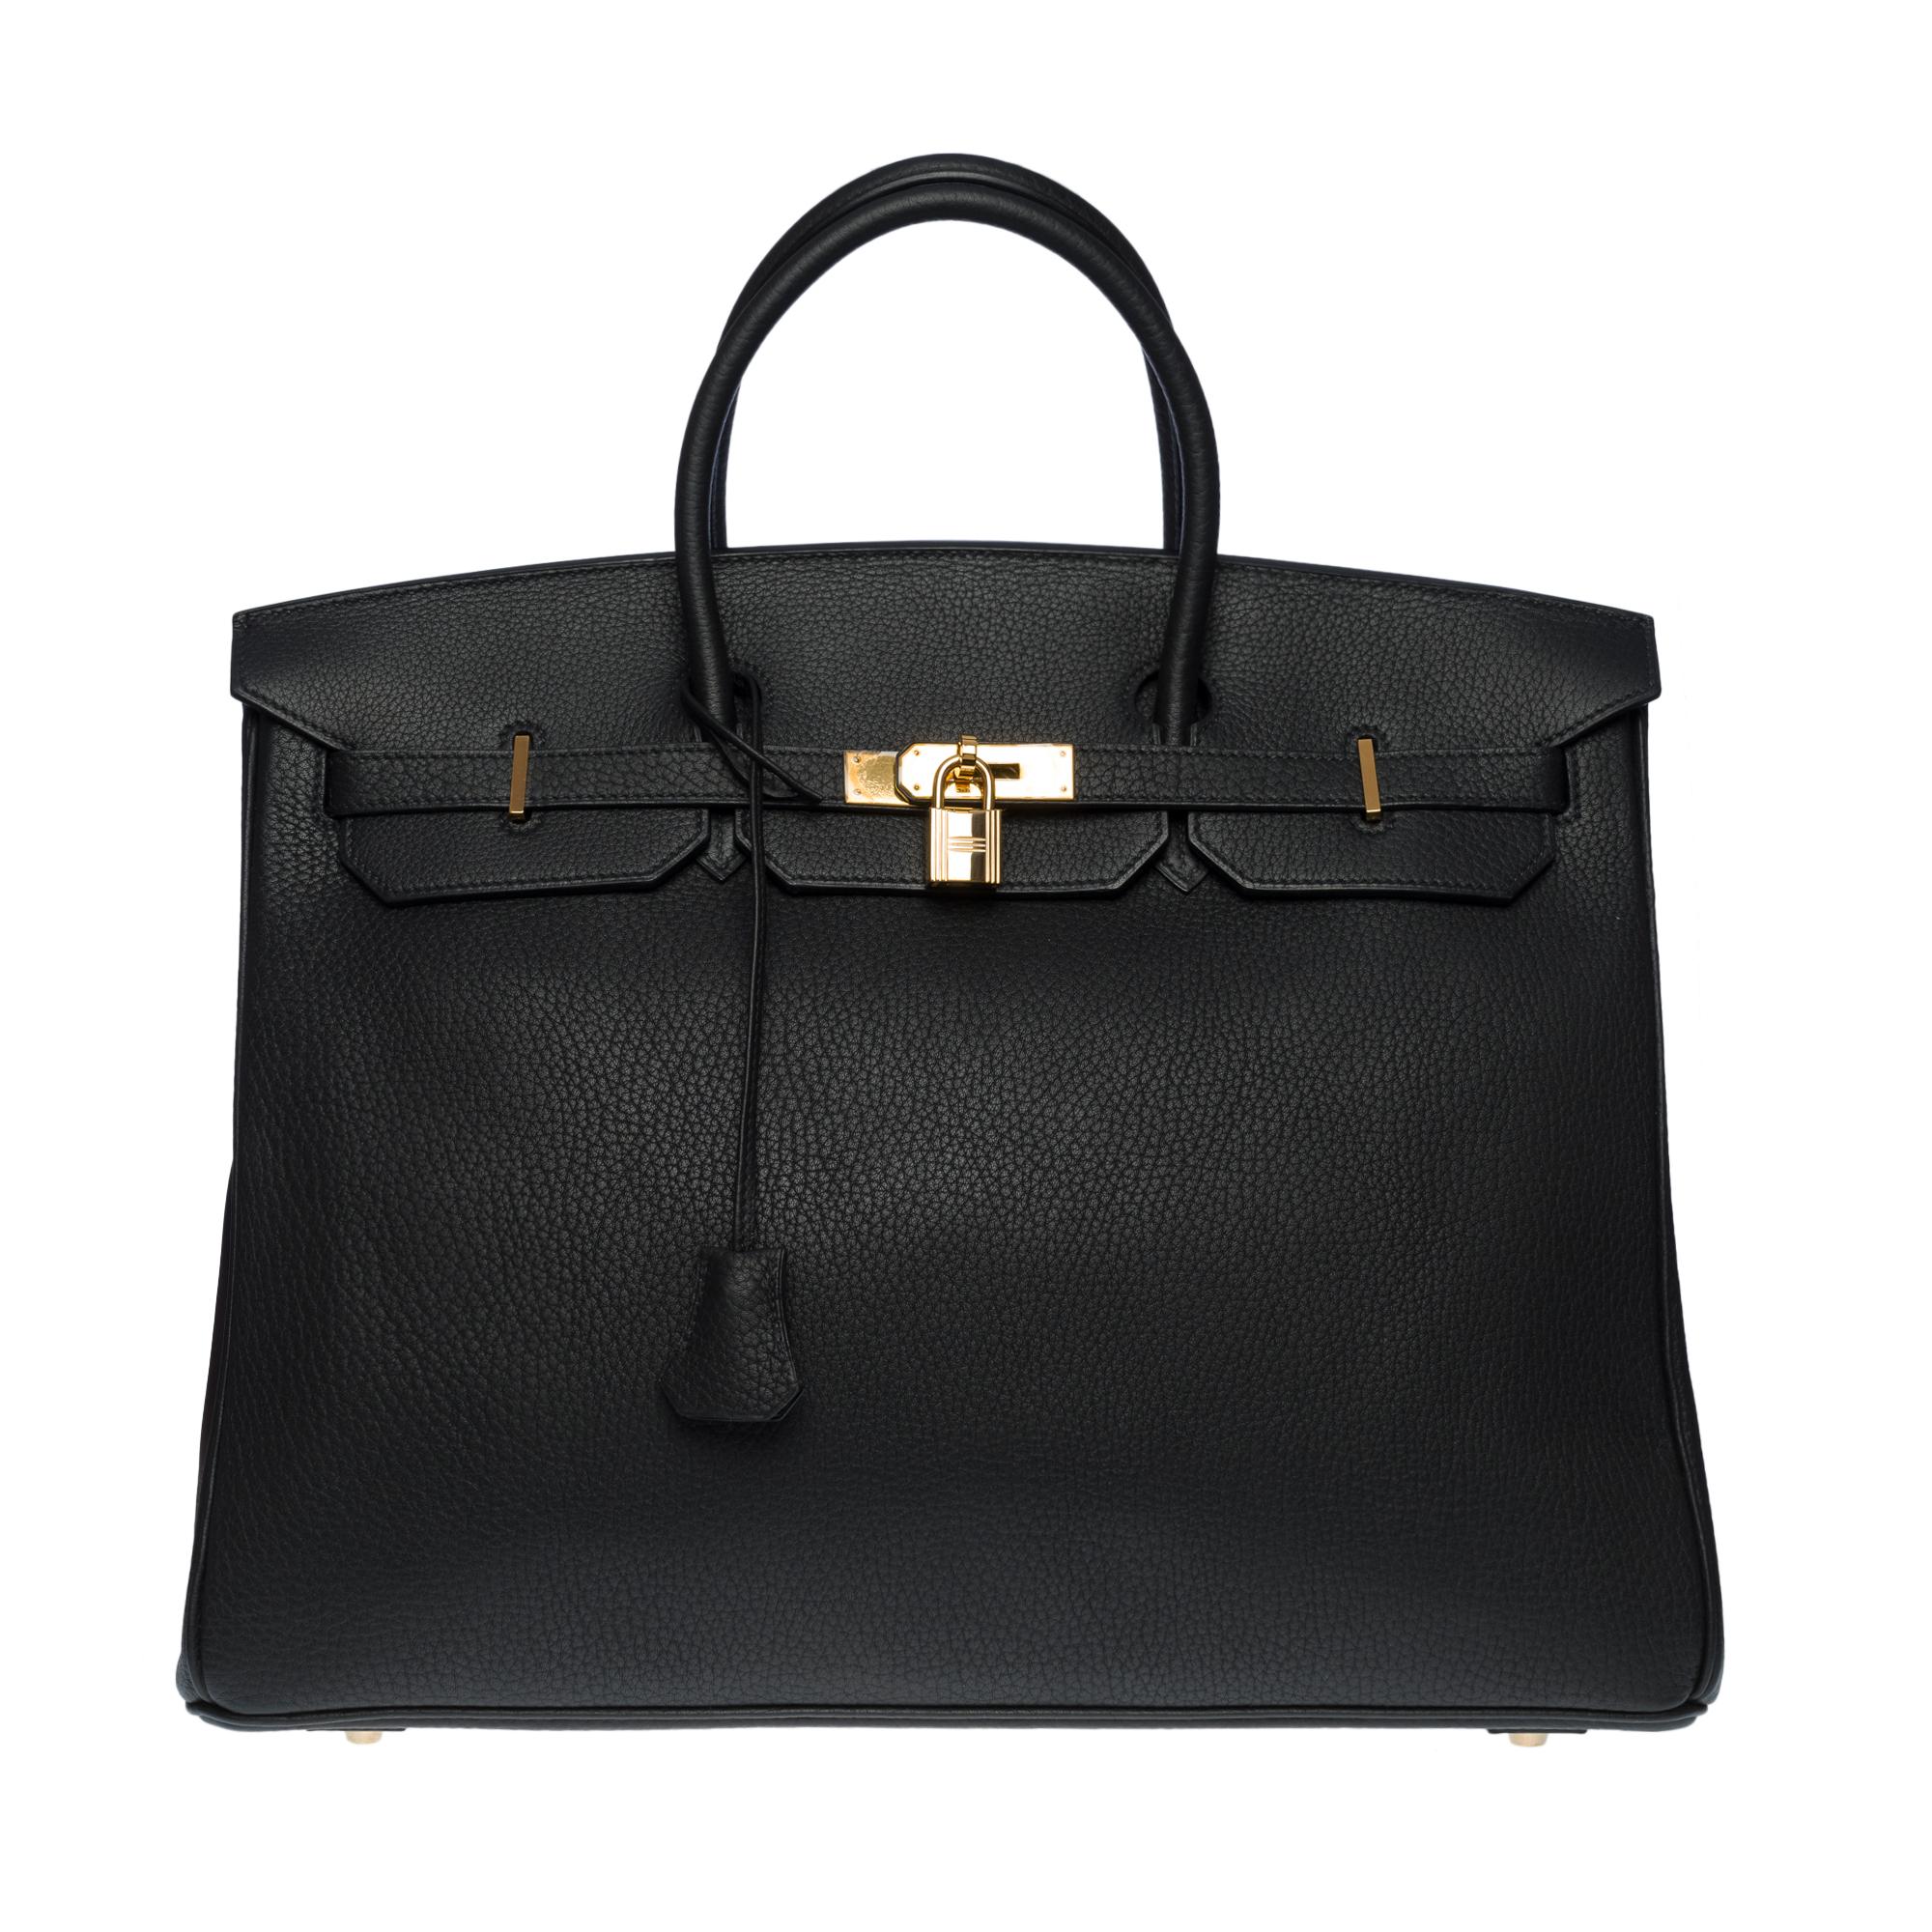 Amazing Hermes Birkin 40 handbag in black togo leather, gold plated metal hardware, double black leather handle for a hand-held
Flap closure
Black leather lining, one zippered pocket, one patch pocket
Signature: 